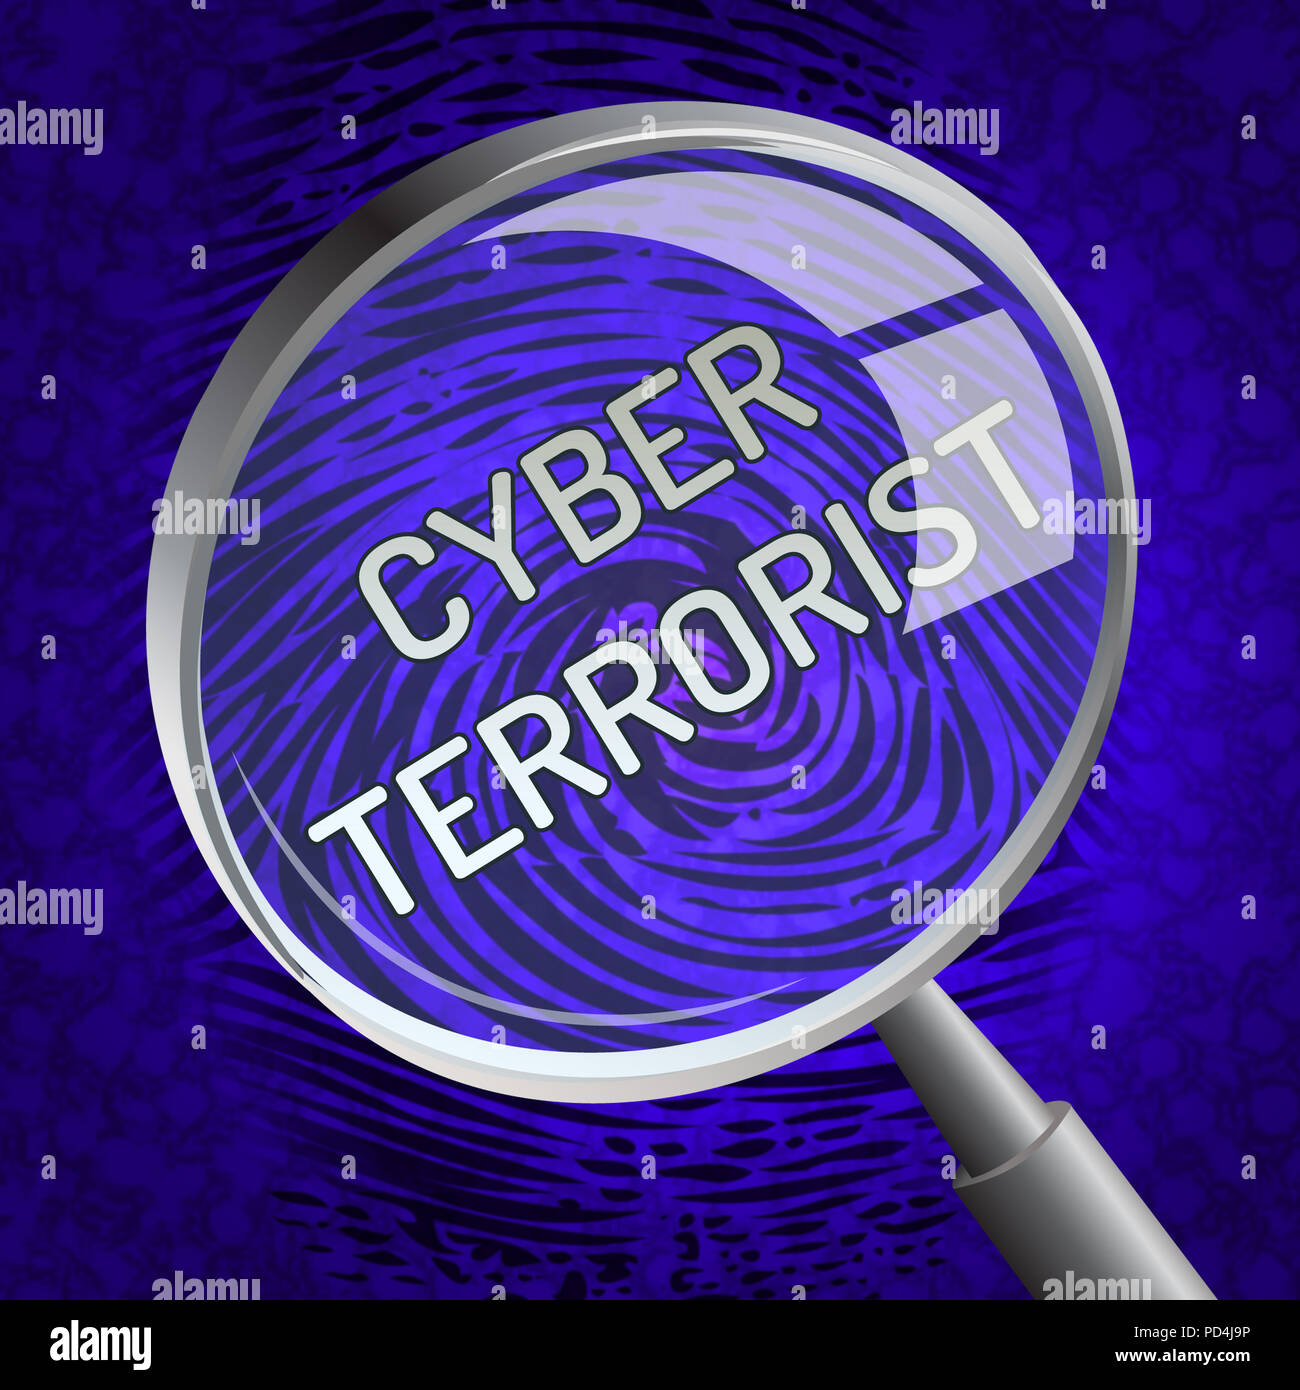 Cyber Terrorist Extremism Hacking Alert 3d Rendering Shows Breach Of Computers Using Digital Espionage And Malware Stock Photo